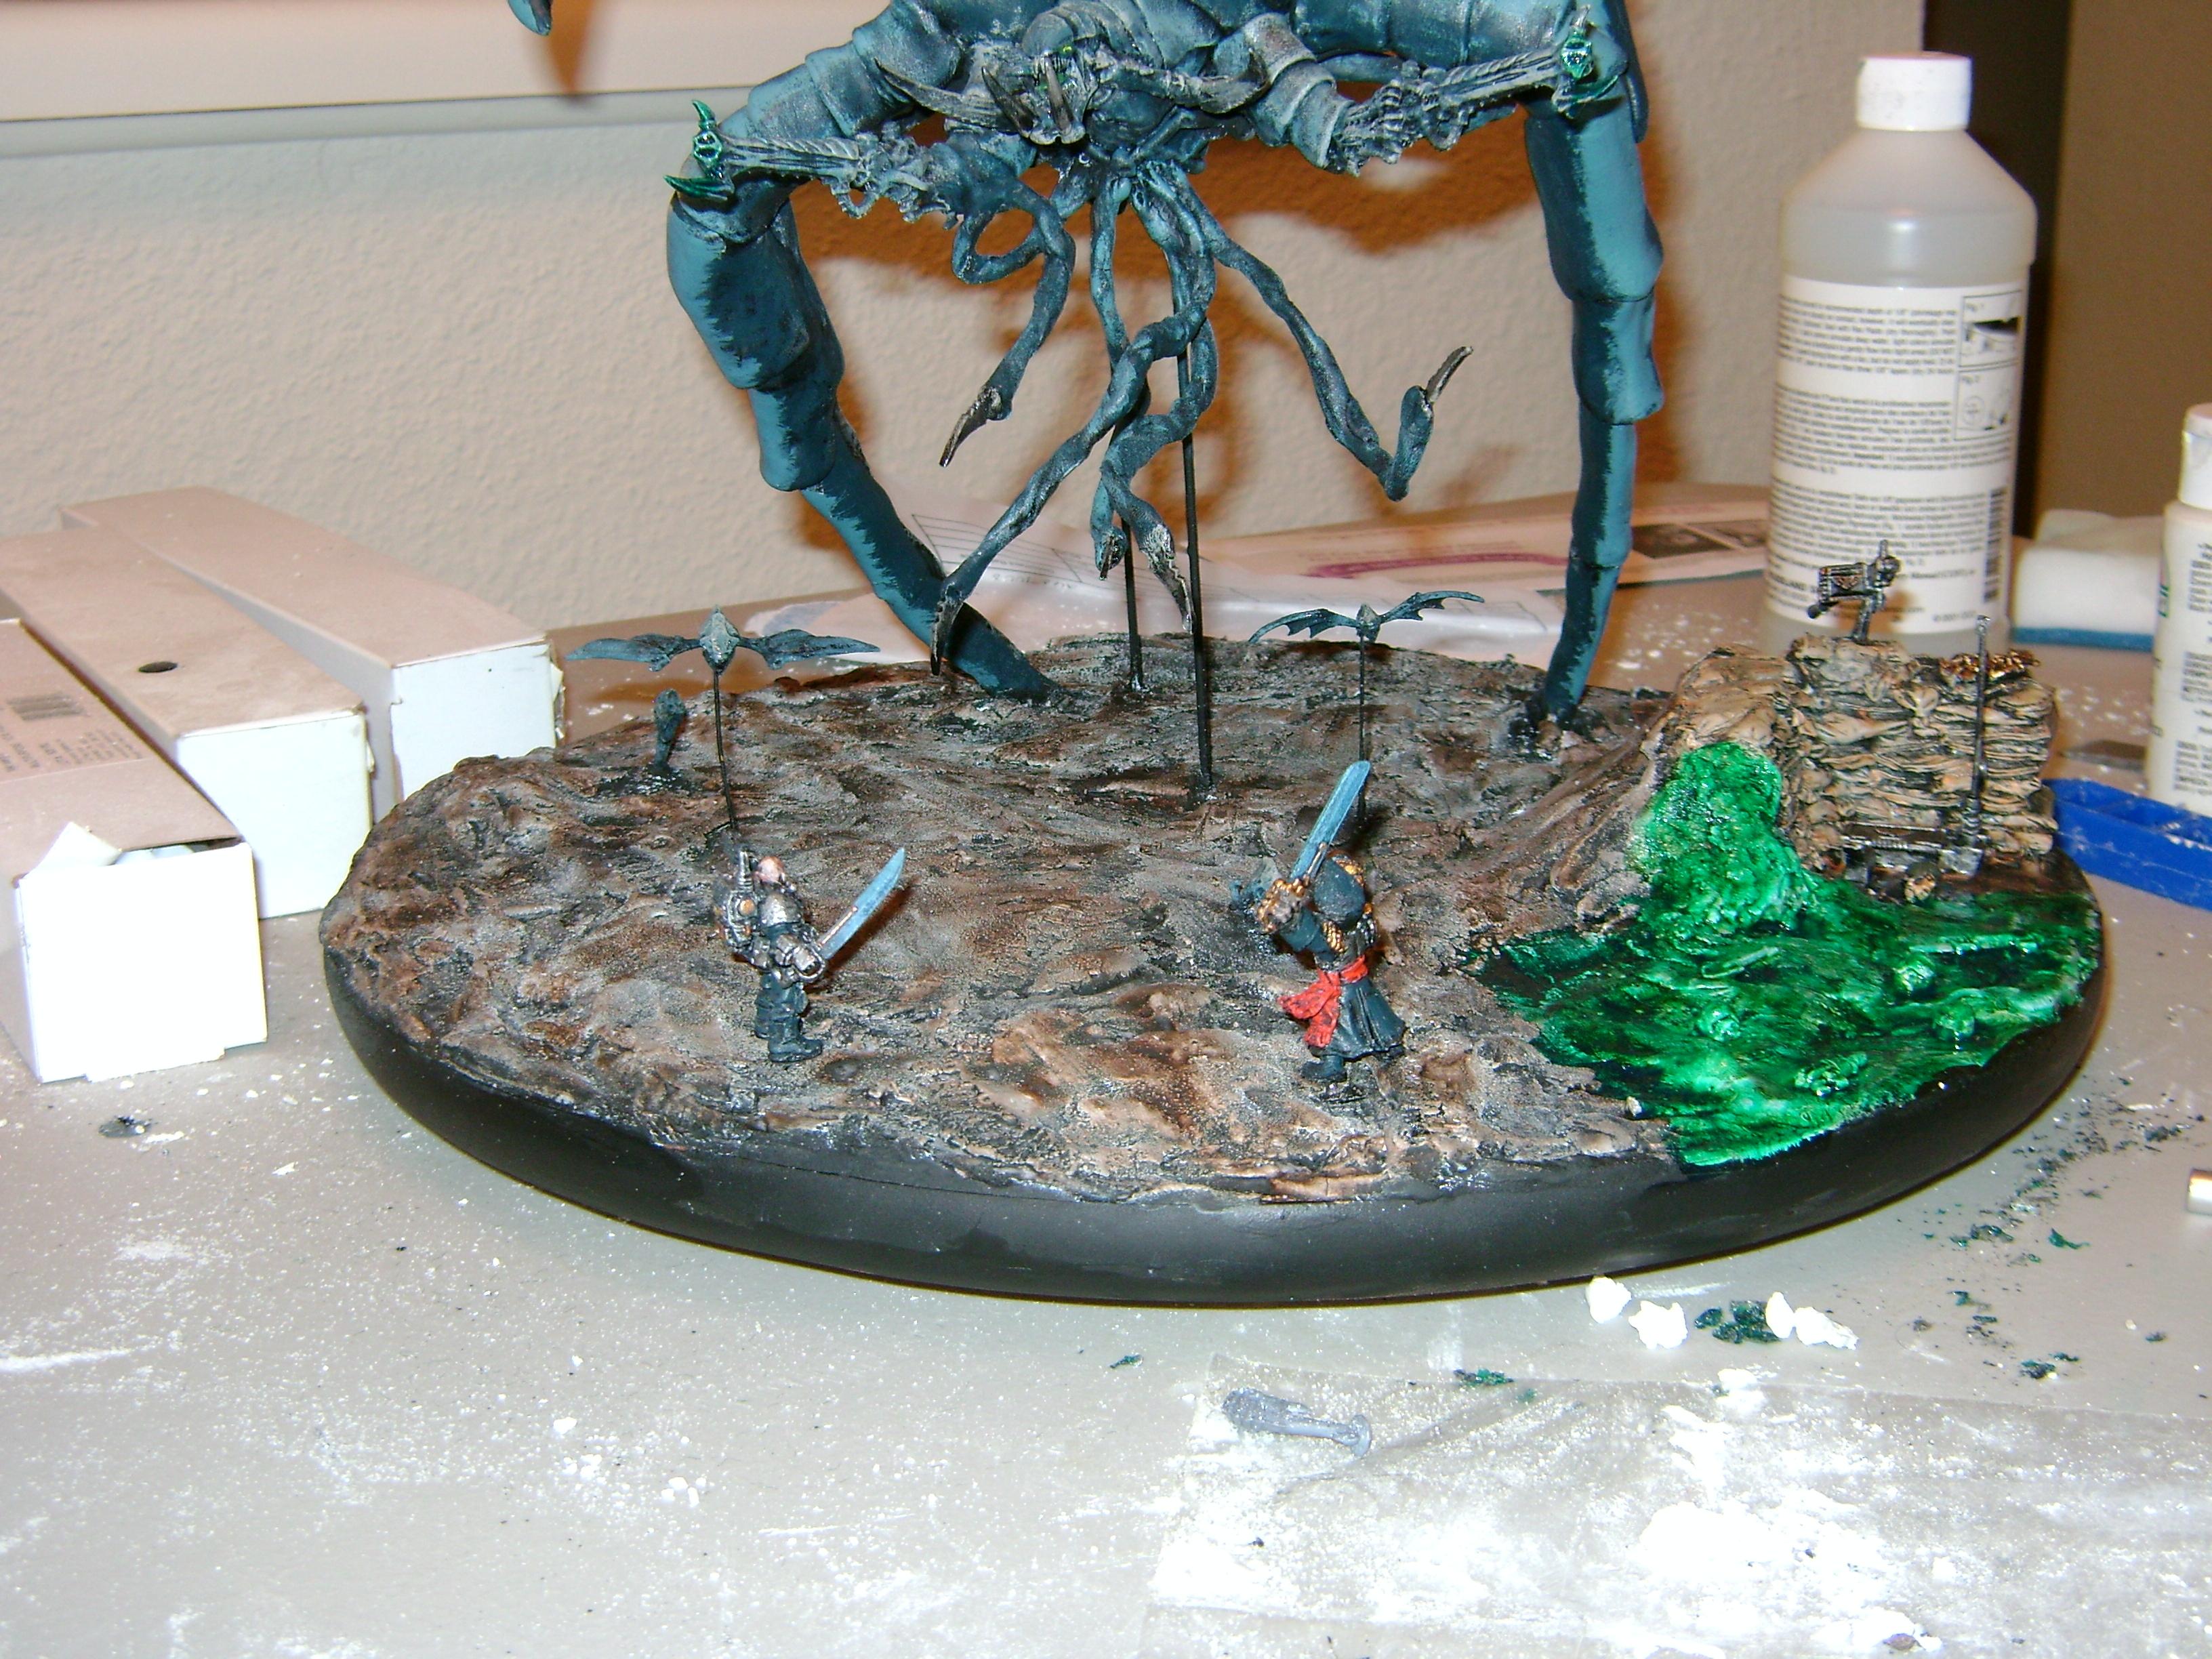 Venom cannon goo and tyranid spit/slime  made with realistic water effects with dye for the goo